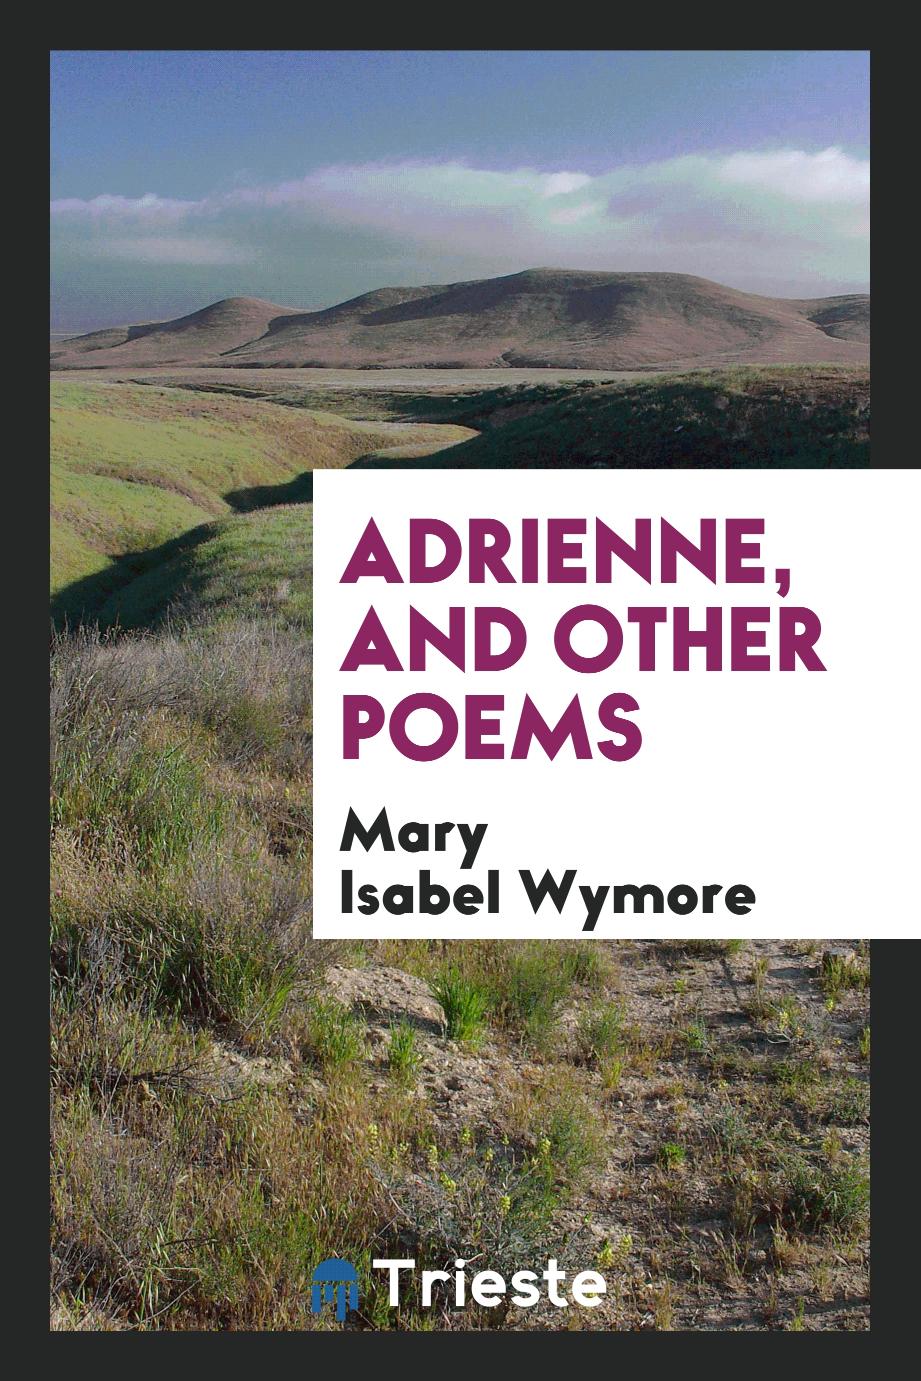 Adrienne, and Other Poems